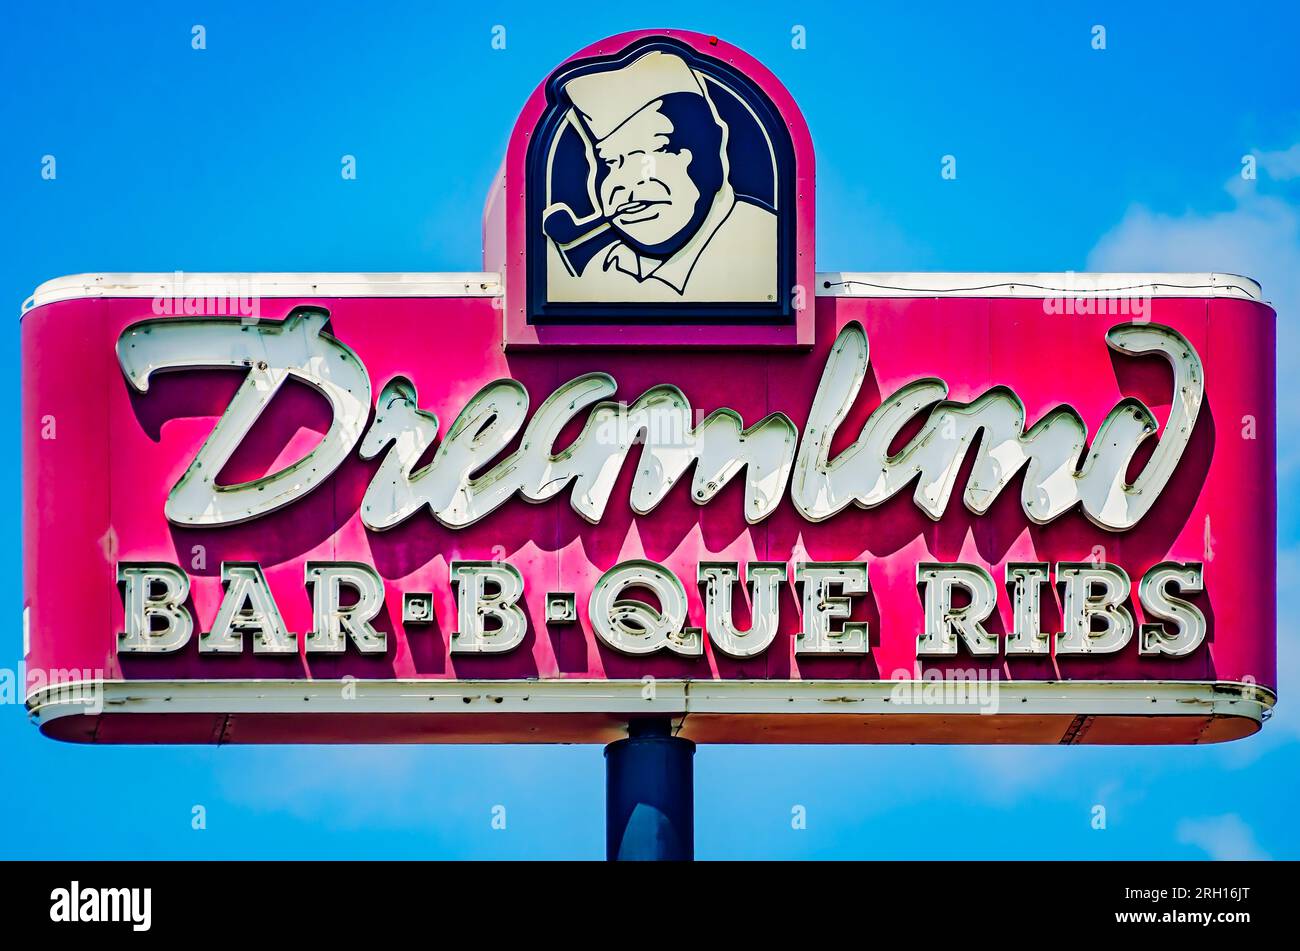 Dreamland Bar-B-Que Ribs is advertised on a neon sign, Aug. 12, 2023, in Mobile, Alabama. Dreamland BBQ was established in Tuscaloosa, Alabama in 1958. Stock Photo